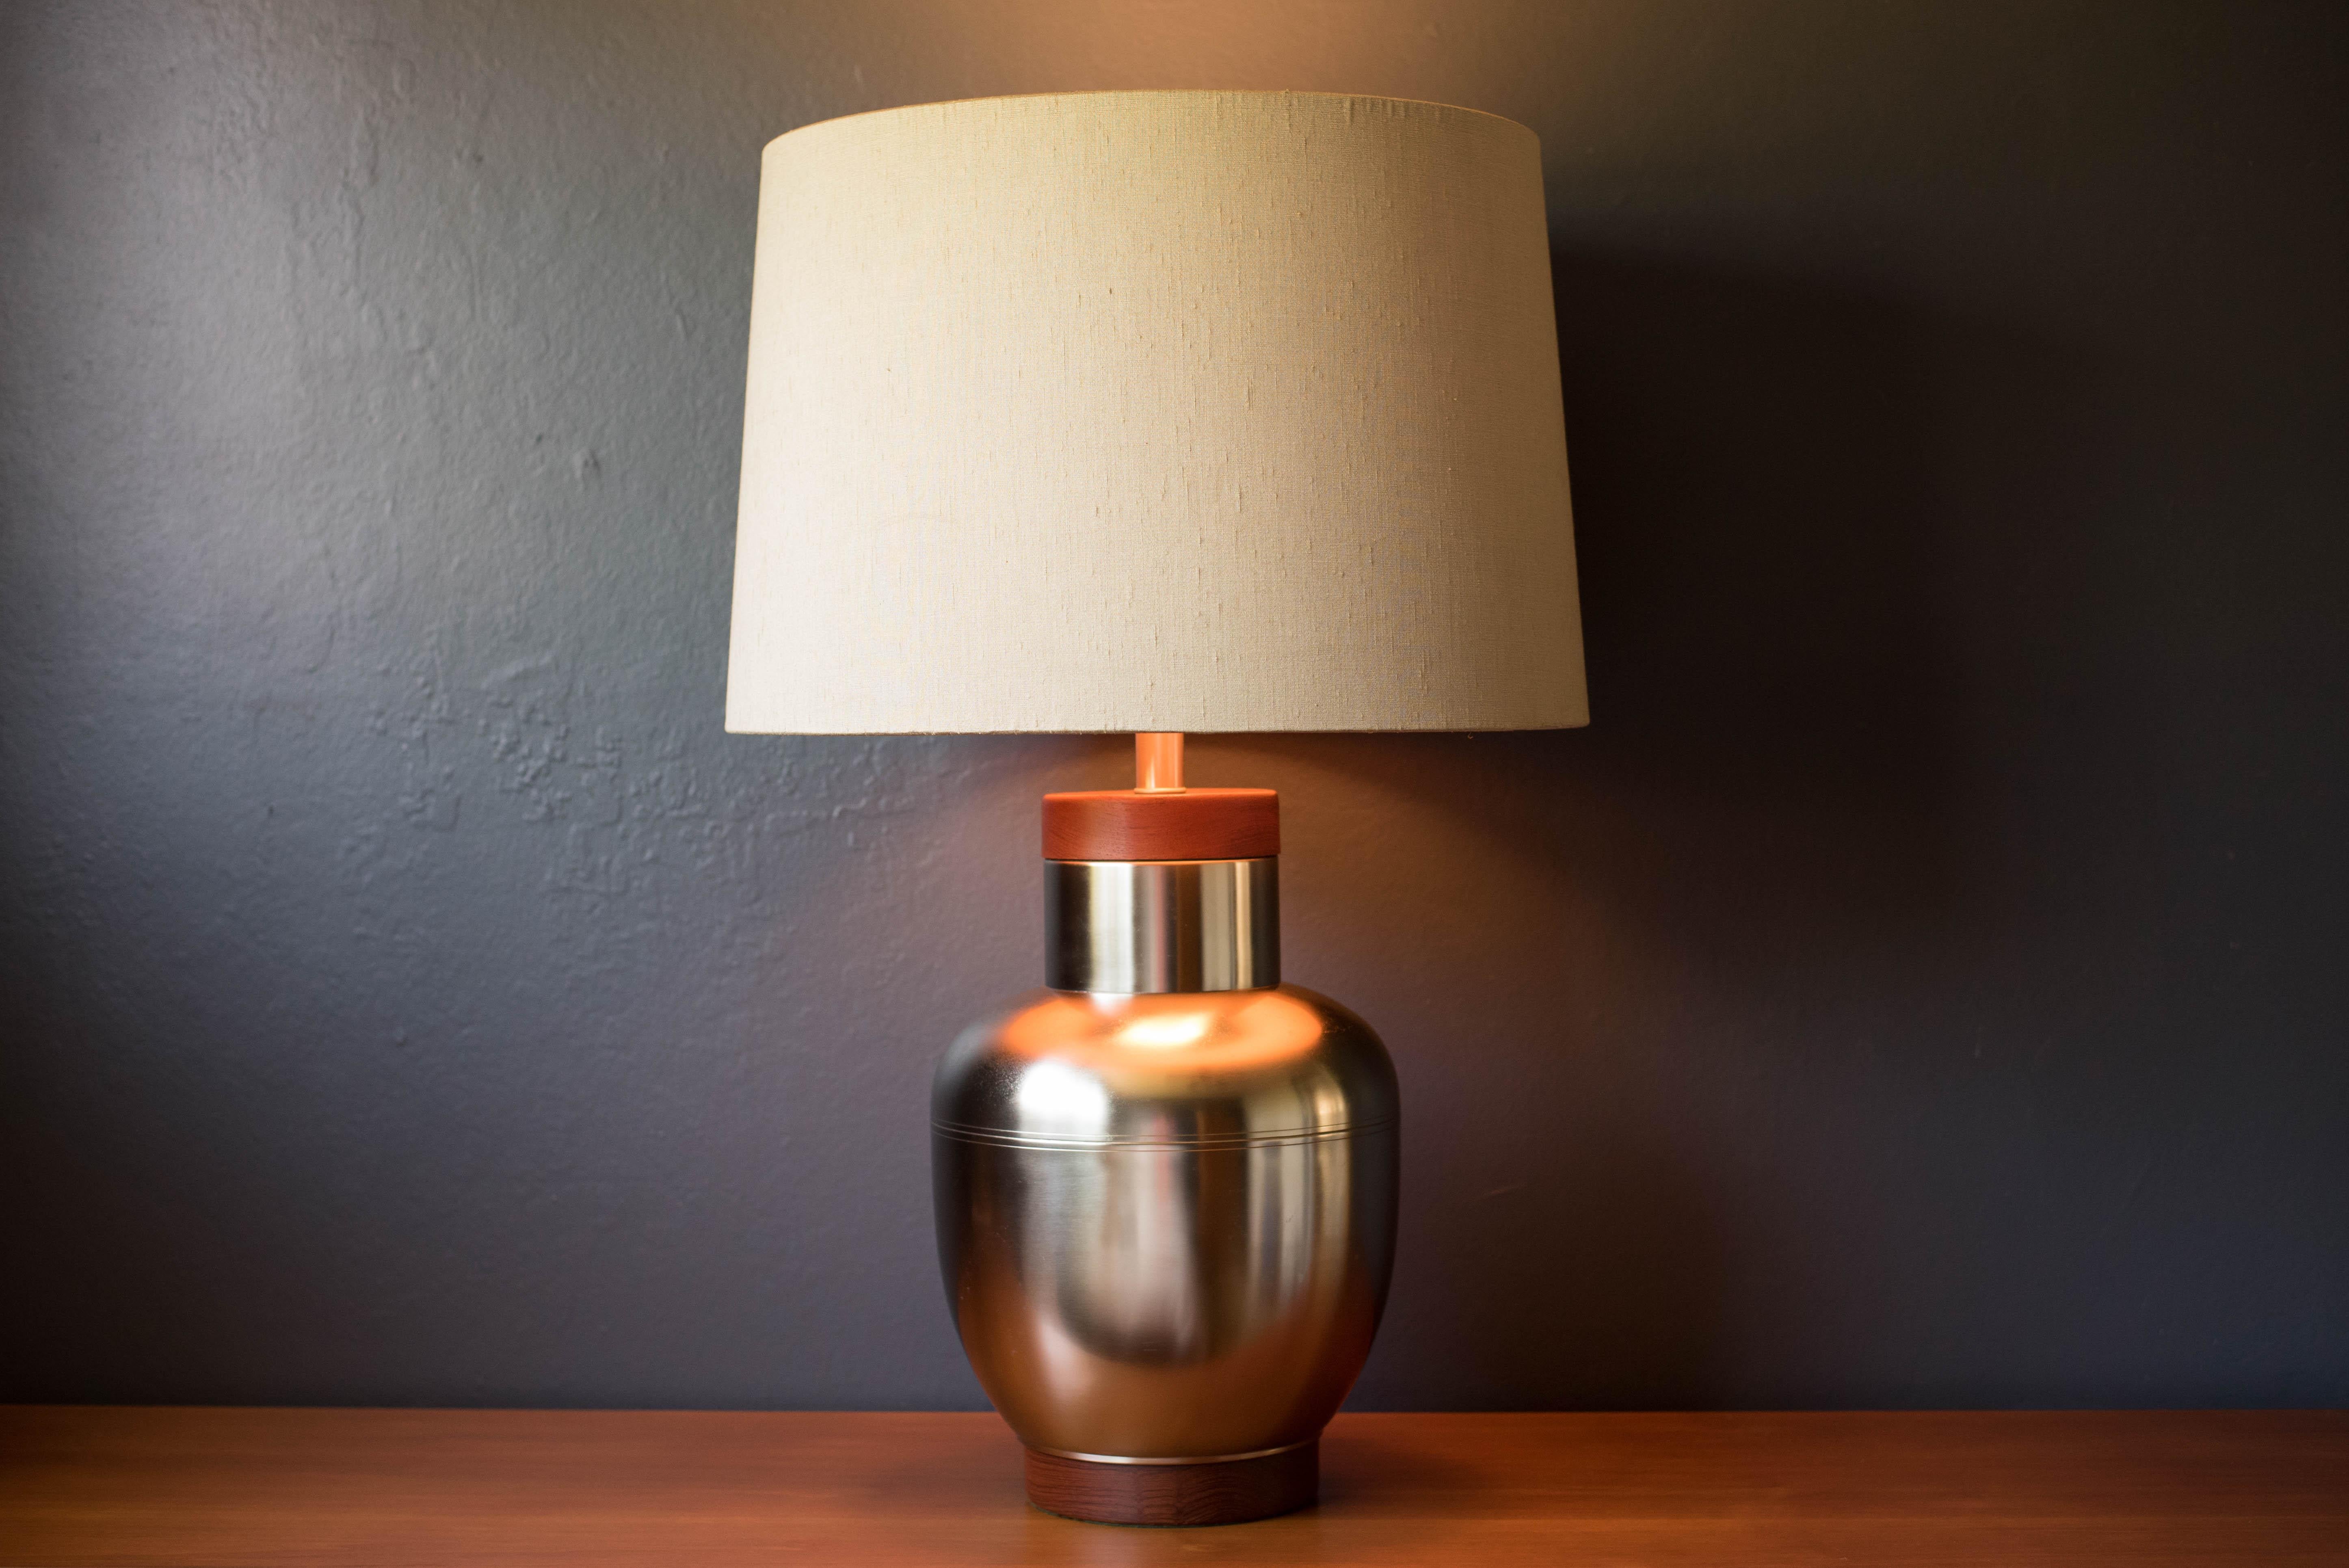 Mid Century Modern table lamp in stainless steel circa 1960's. This classic decorative piece features teak accents and includes a milk glass diffuser. The original linen shade is included. 

Shade: 20